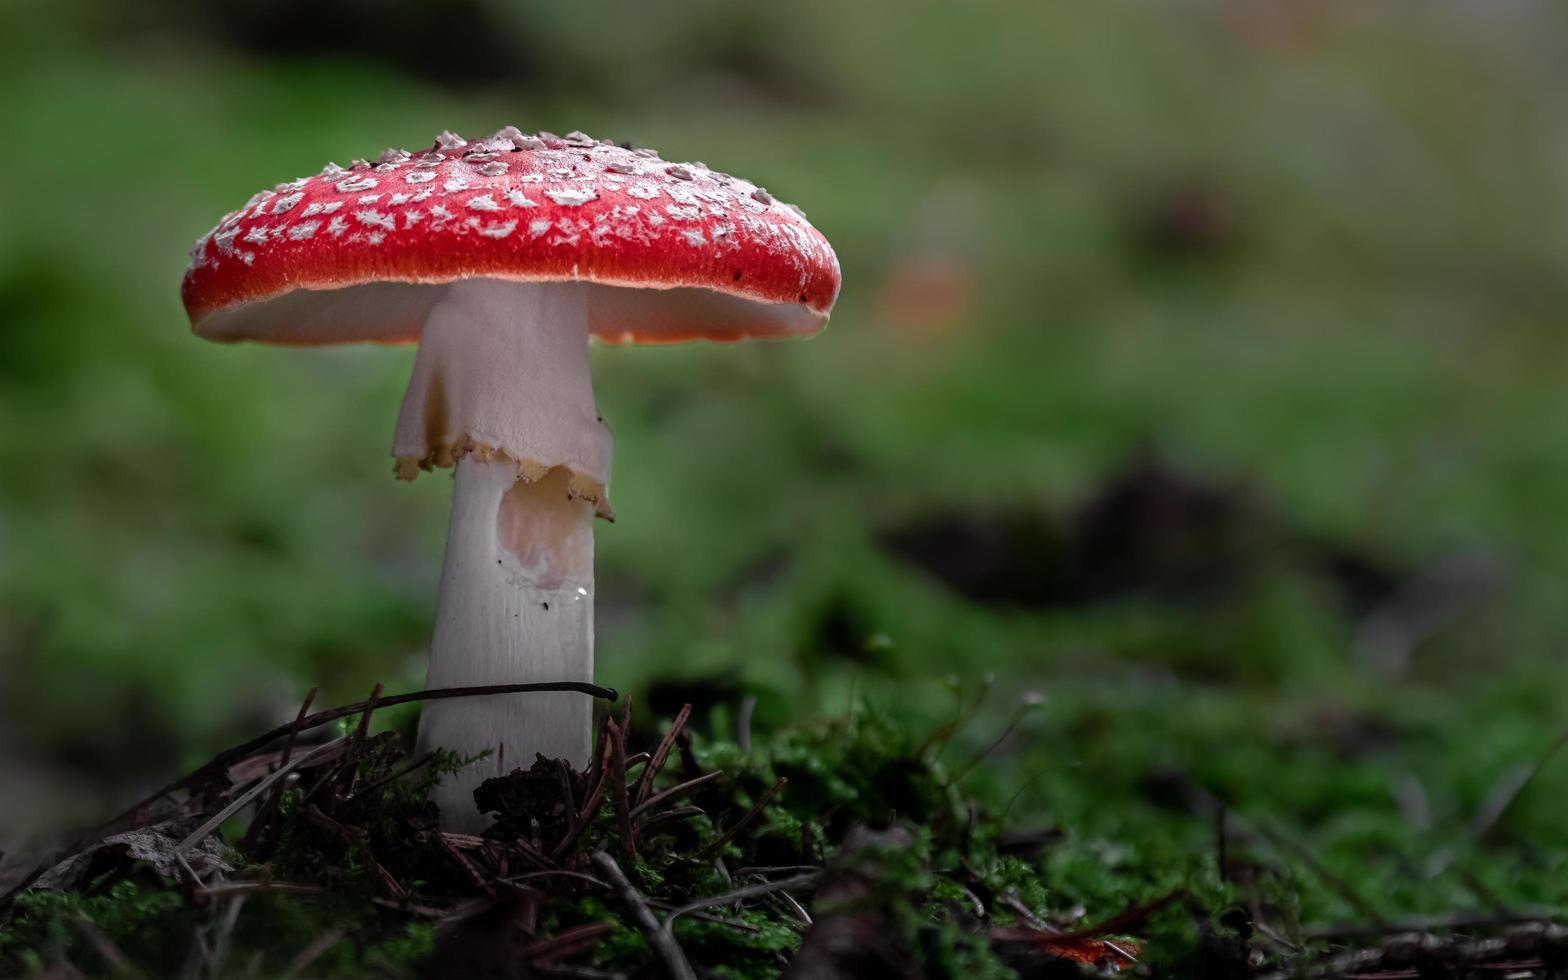 Fly agaric in forest photo